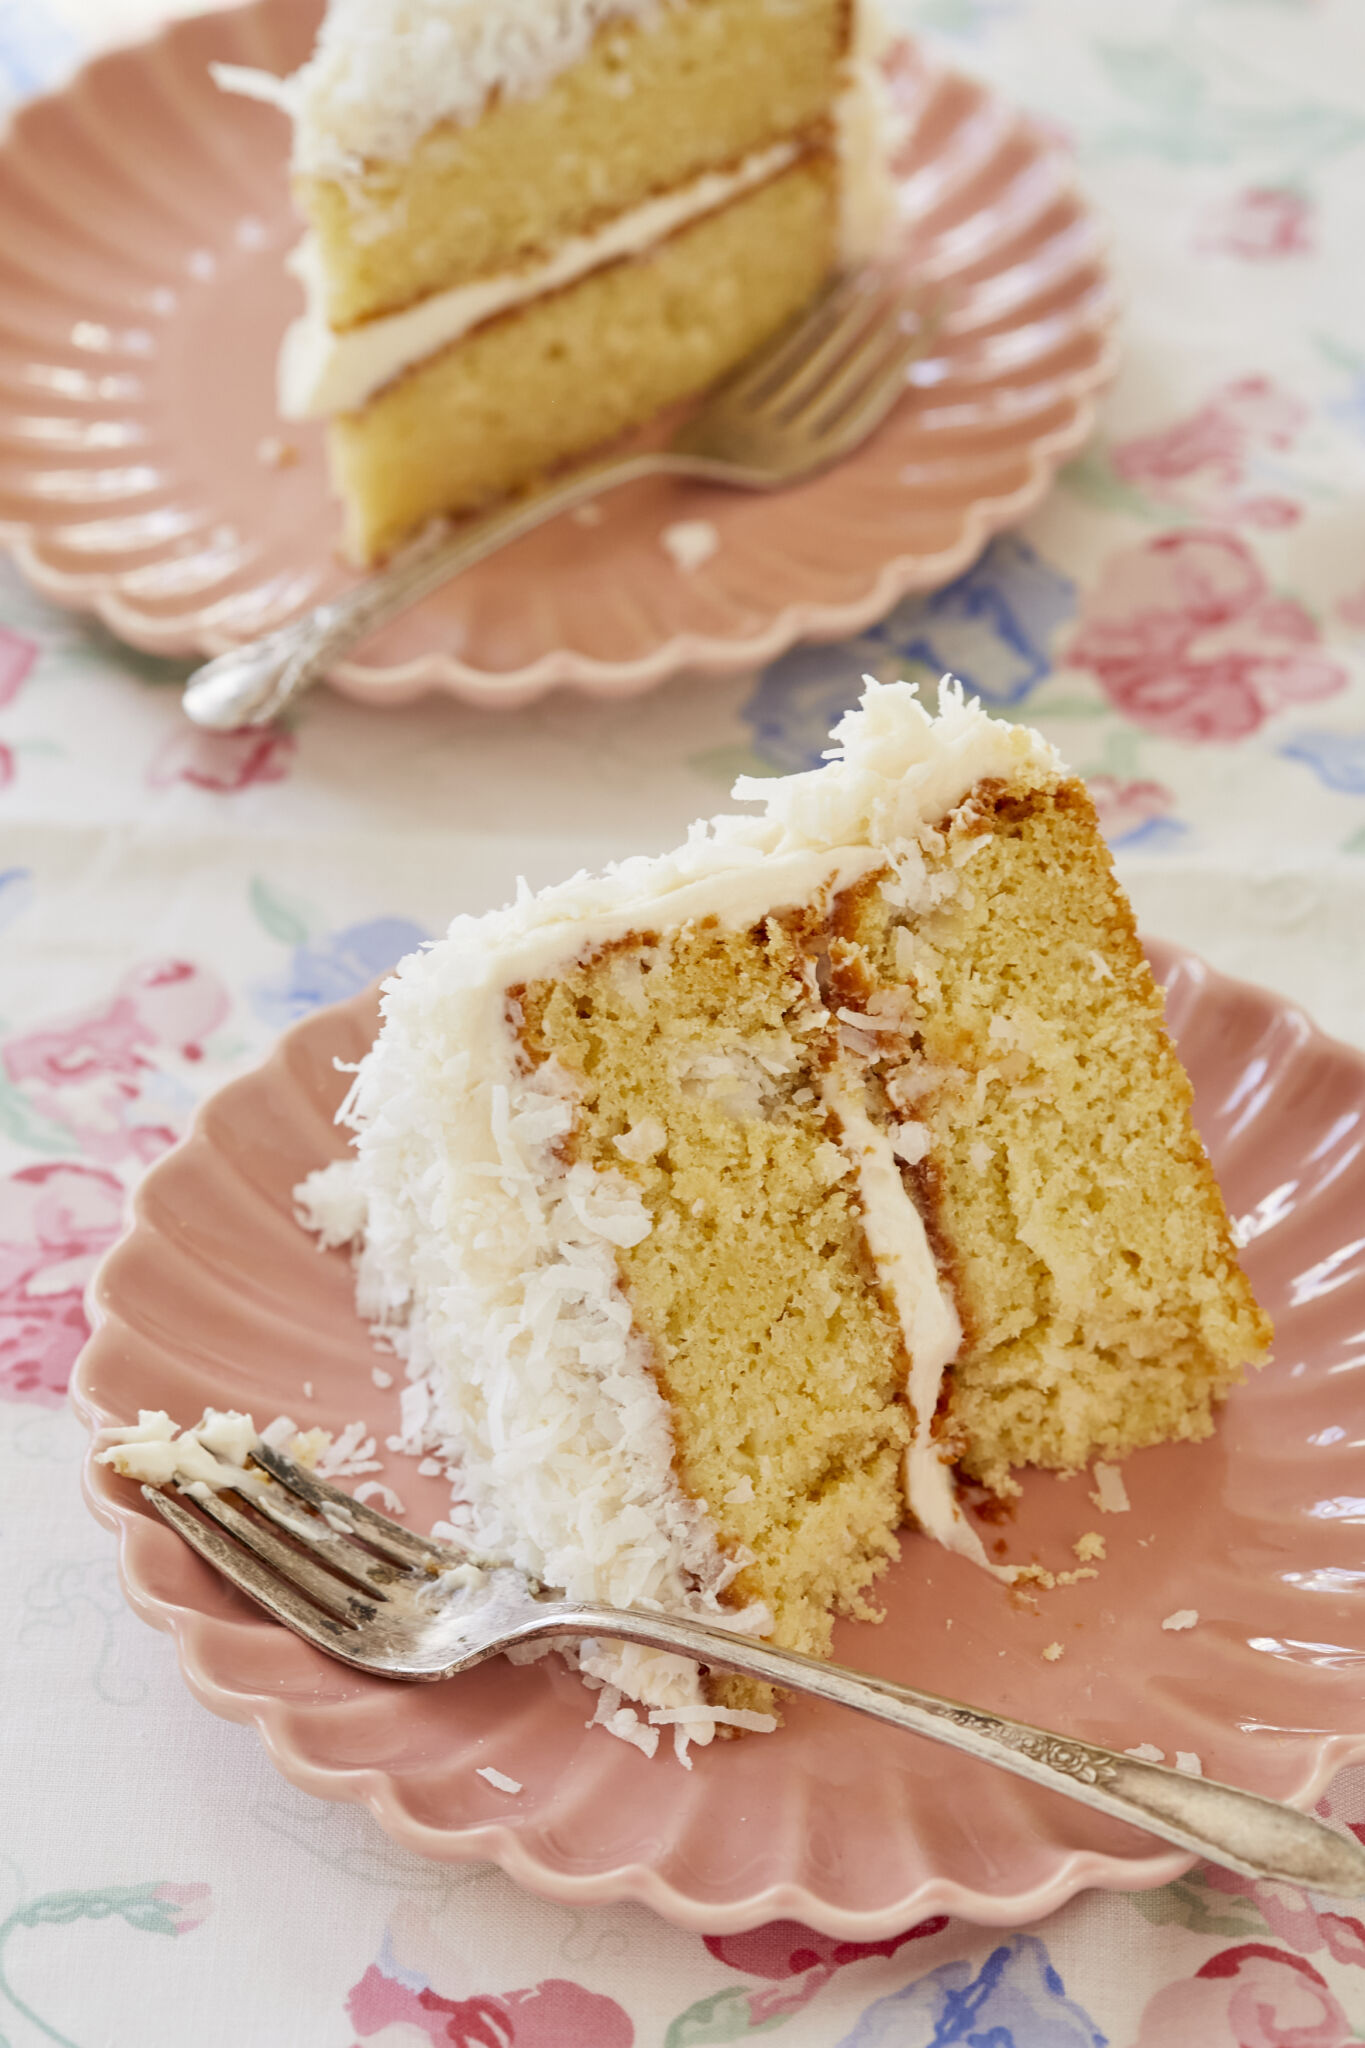 Two slices are served with fork on the plates, showing very moist and soft crumb, smooth frosting and crunchy flakes. . 